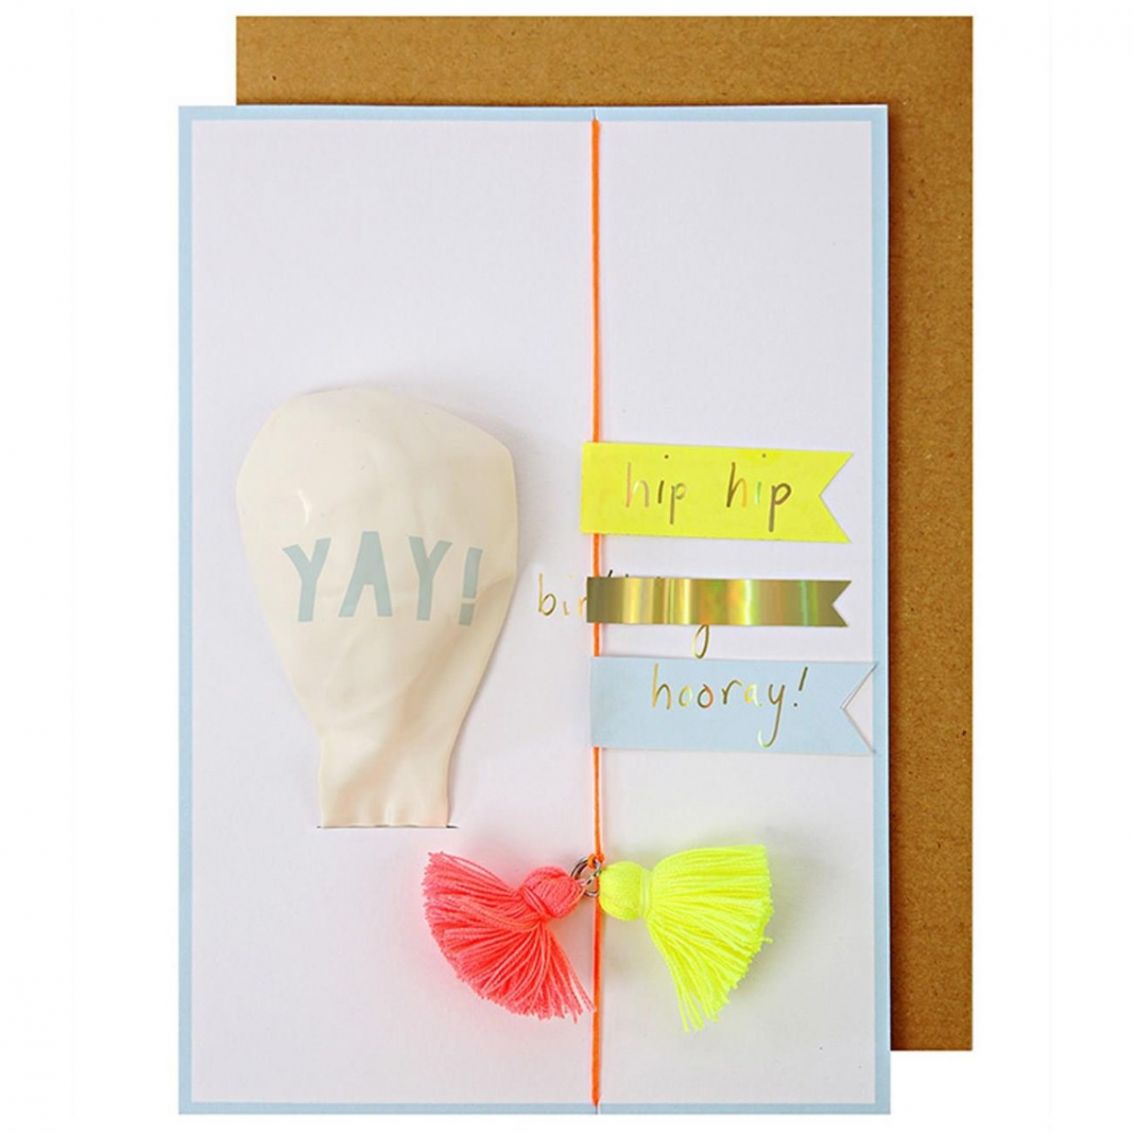 , Cards and Balloons to Buy for a Gift Hampers